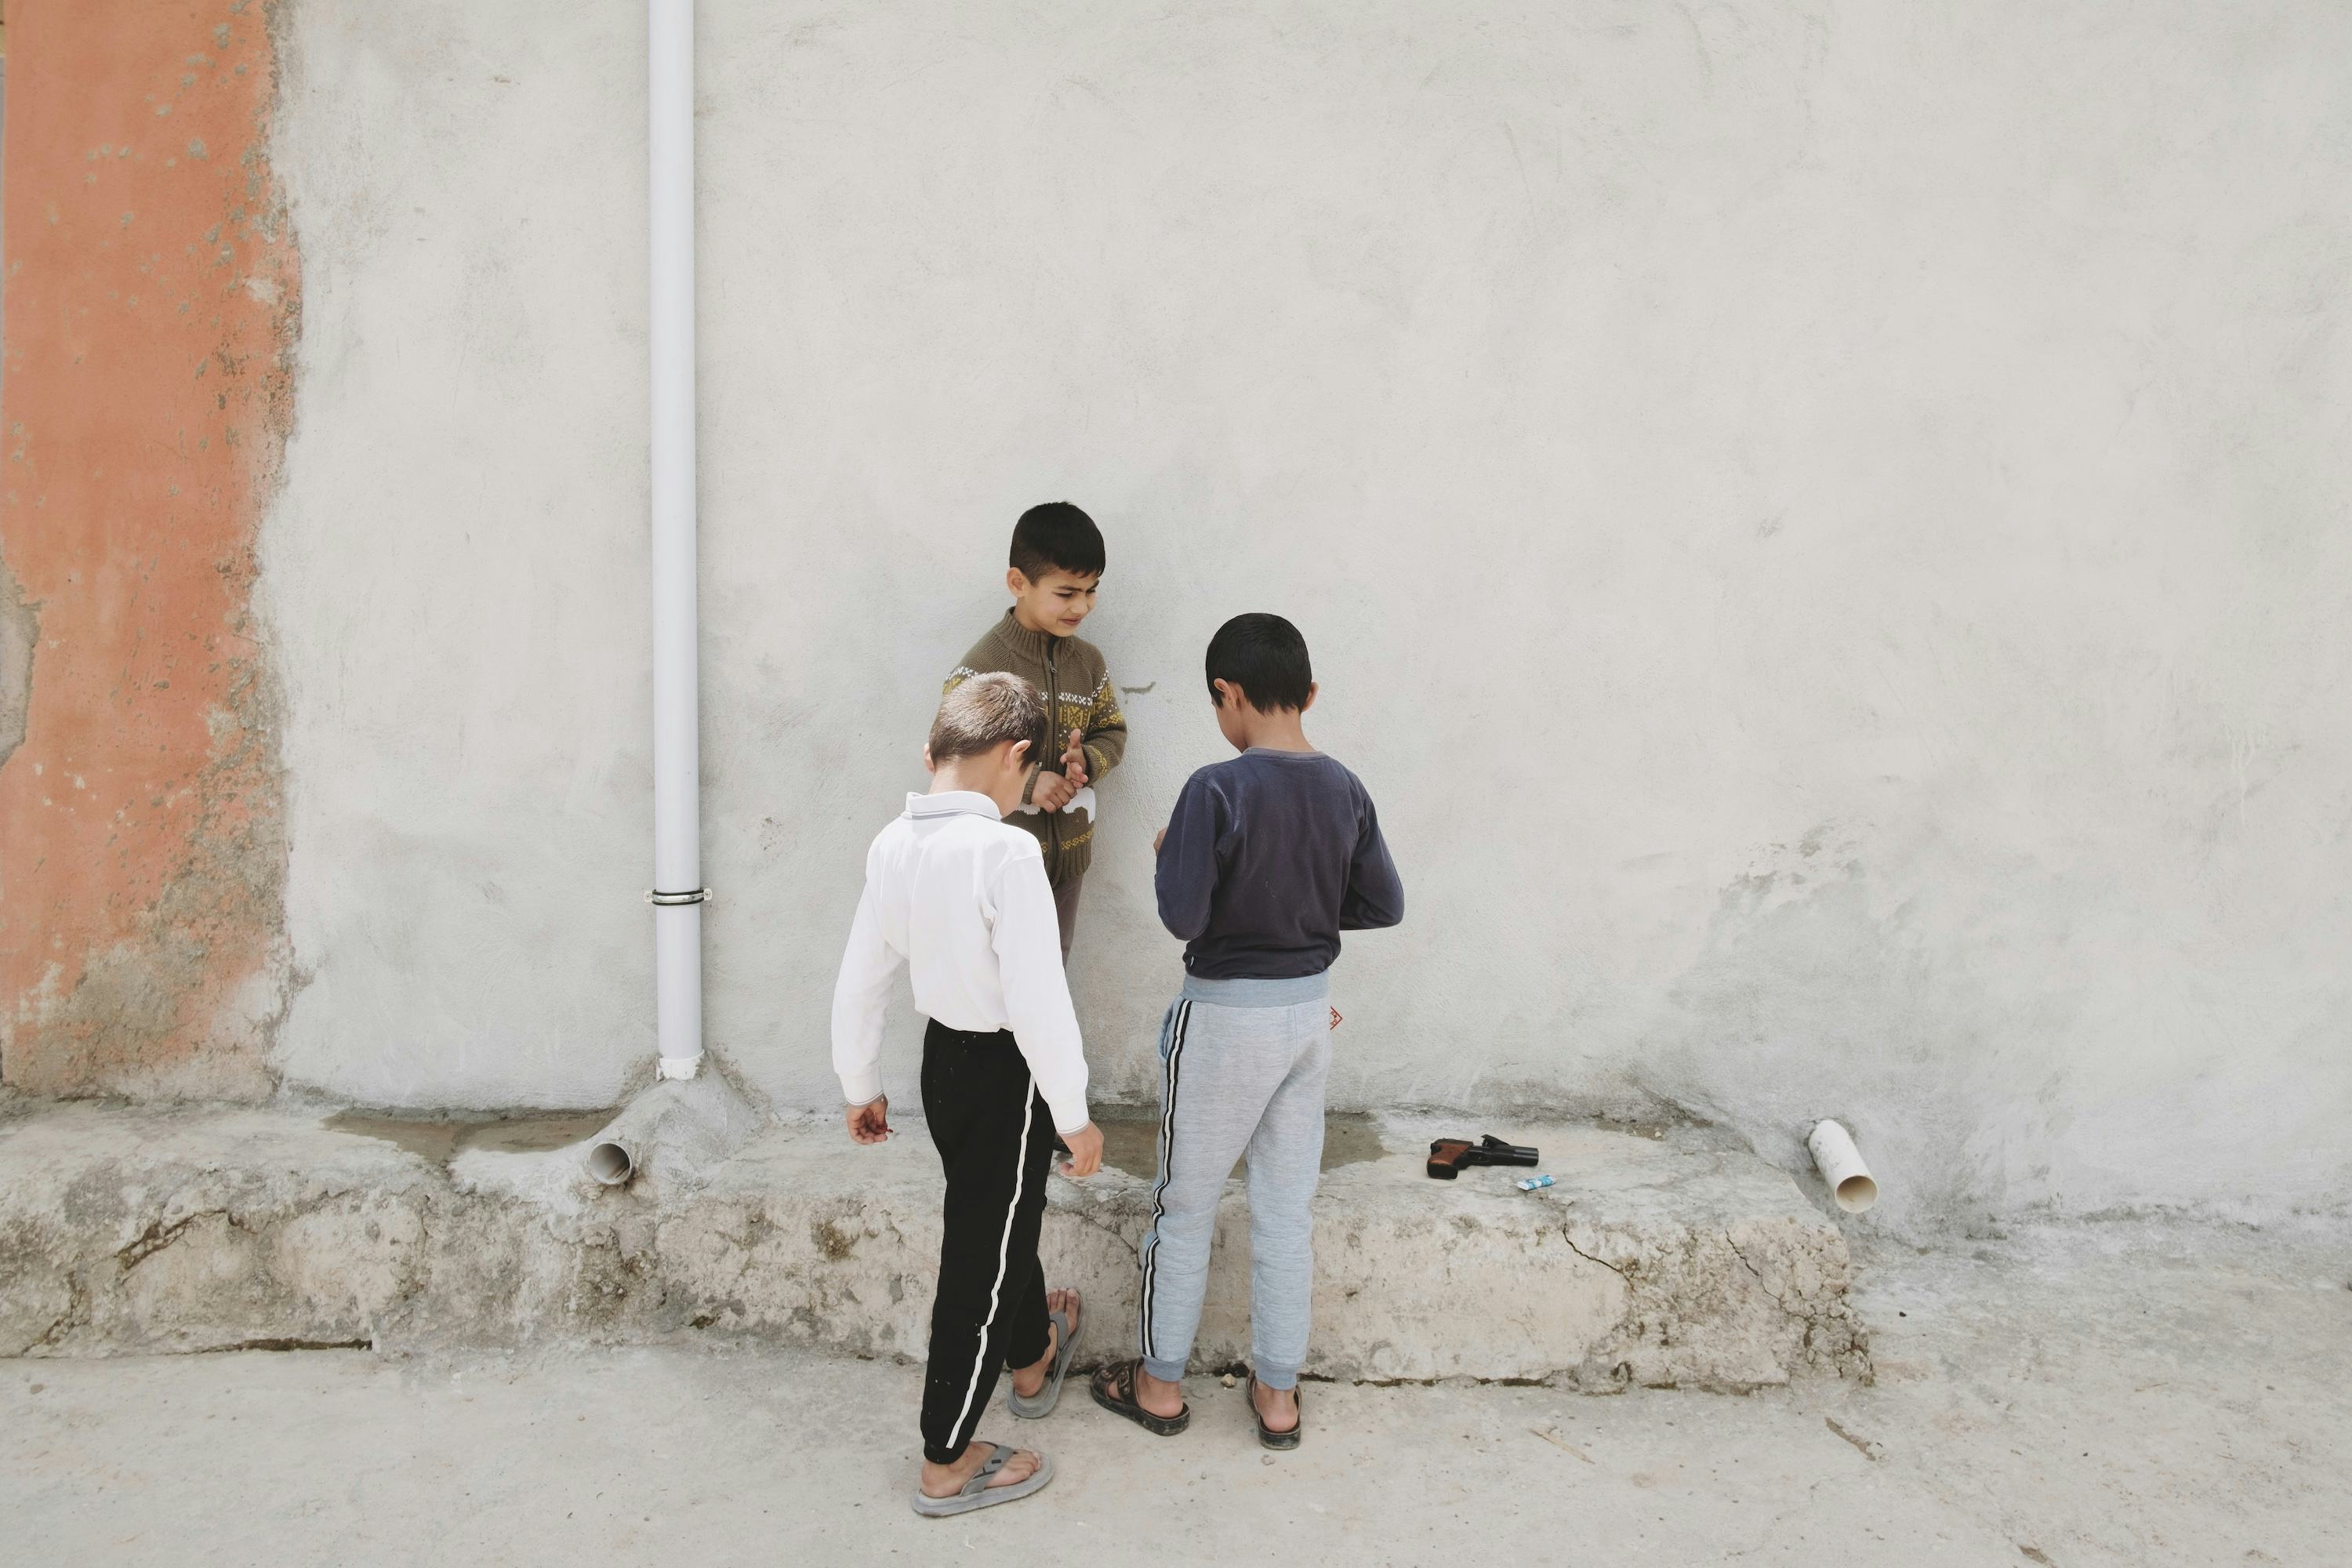 Three little boys, hanging / playing in front of a grey wall.